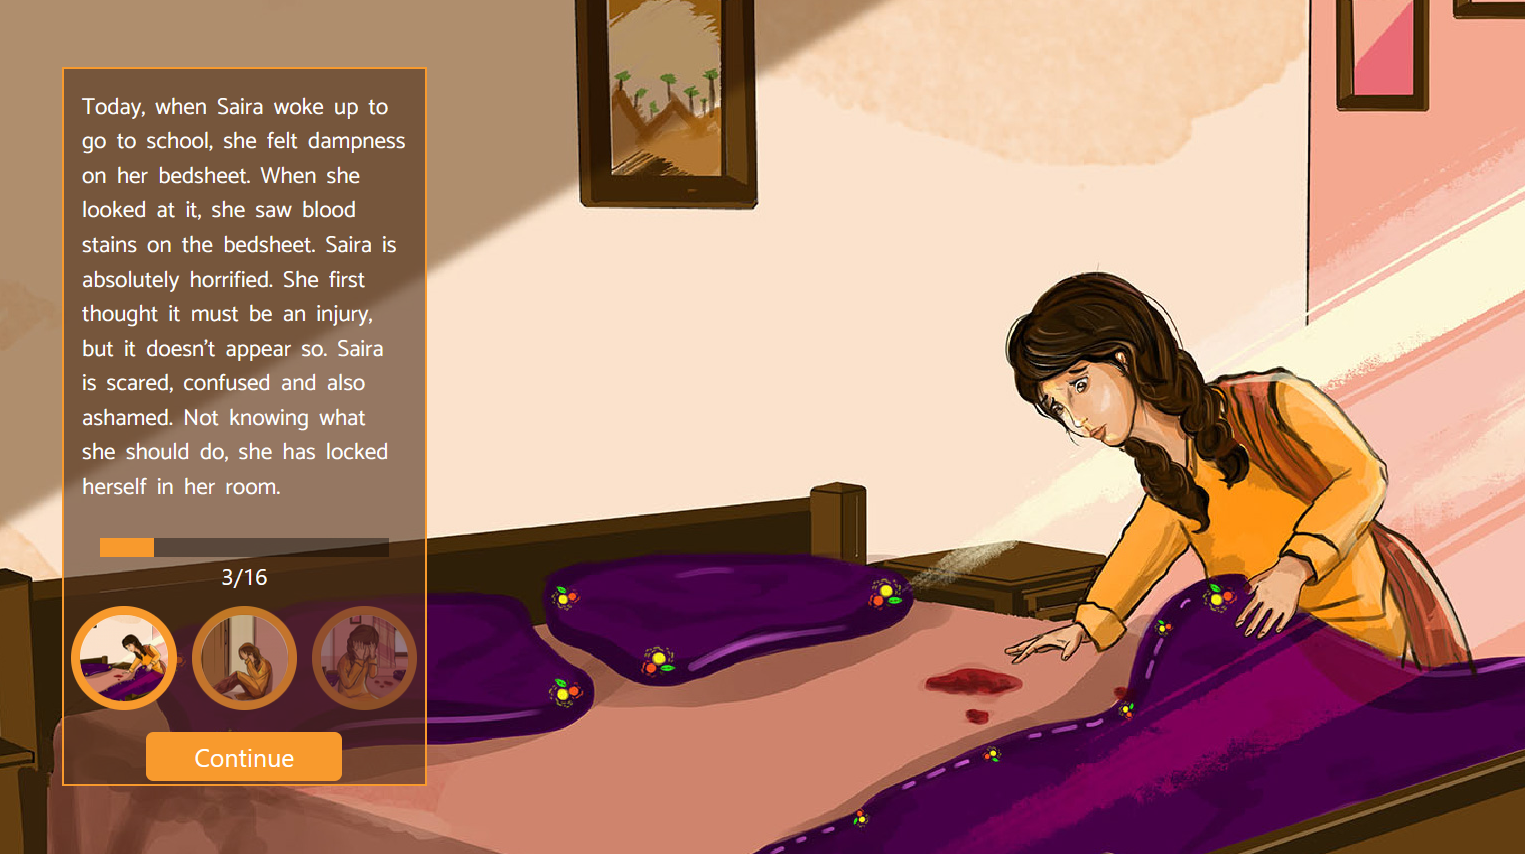 Menstruation is nothing to be ashamed of: scene from the #HelpSaira storyline.